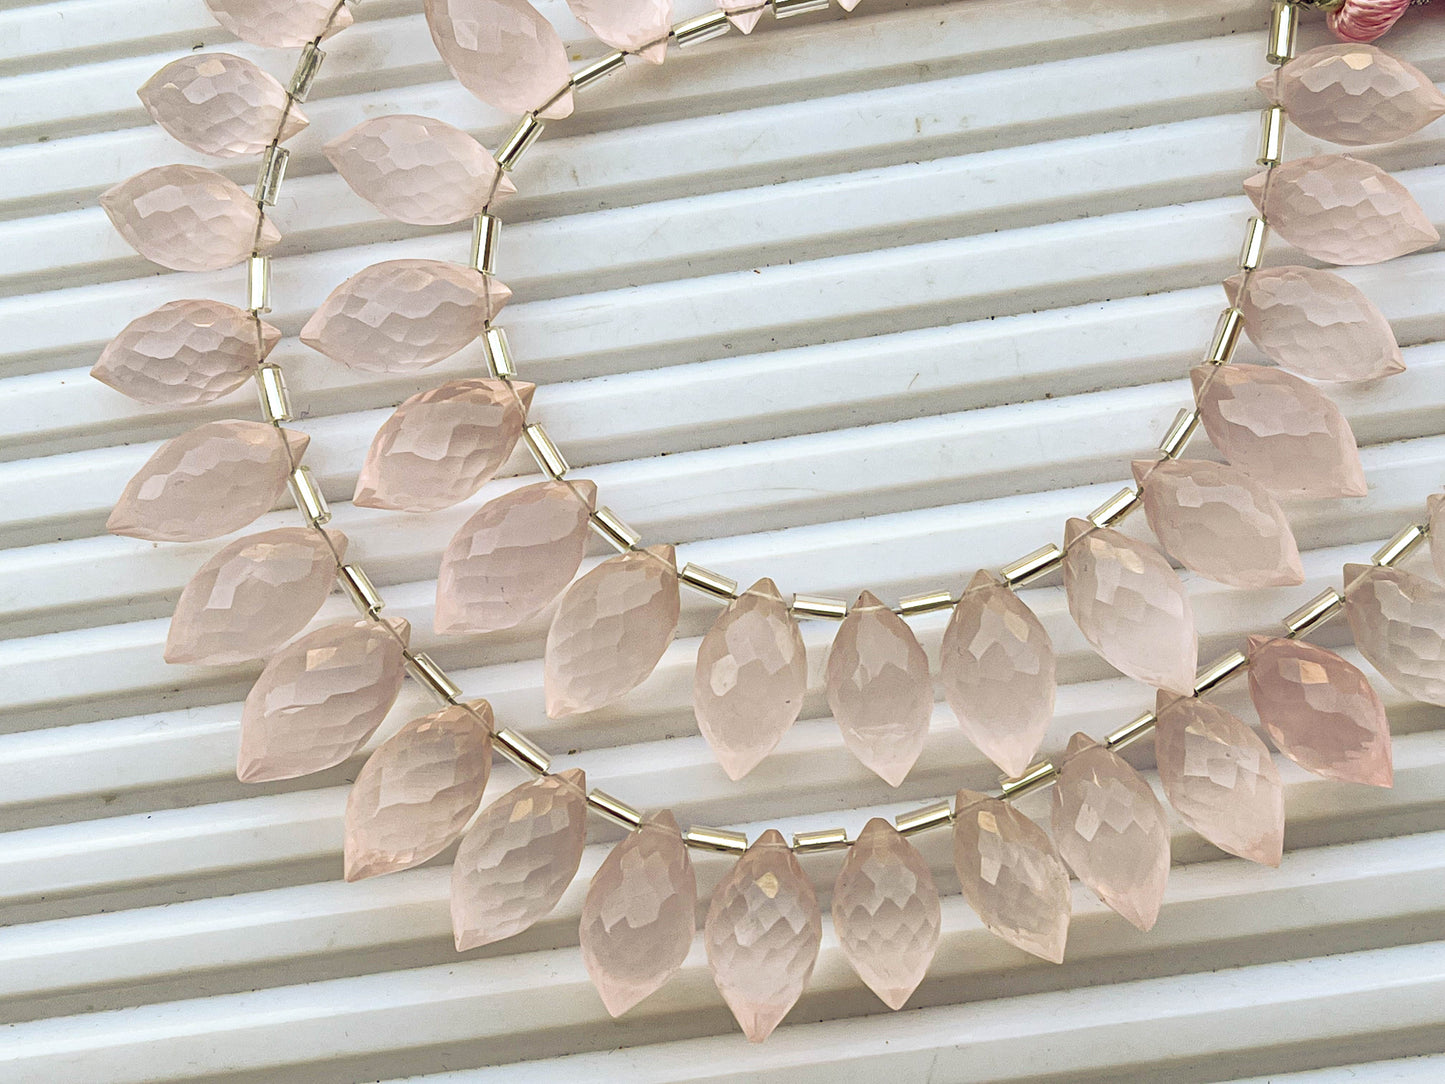 Rose Quartz Faceted Rice Drops Beads Beadsforyourjewelry